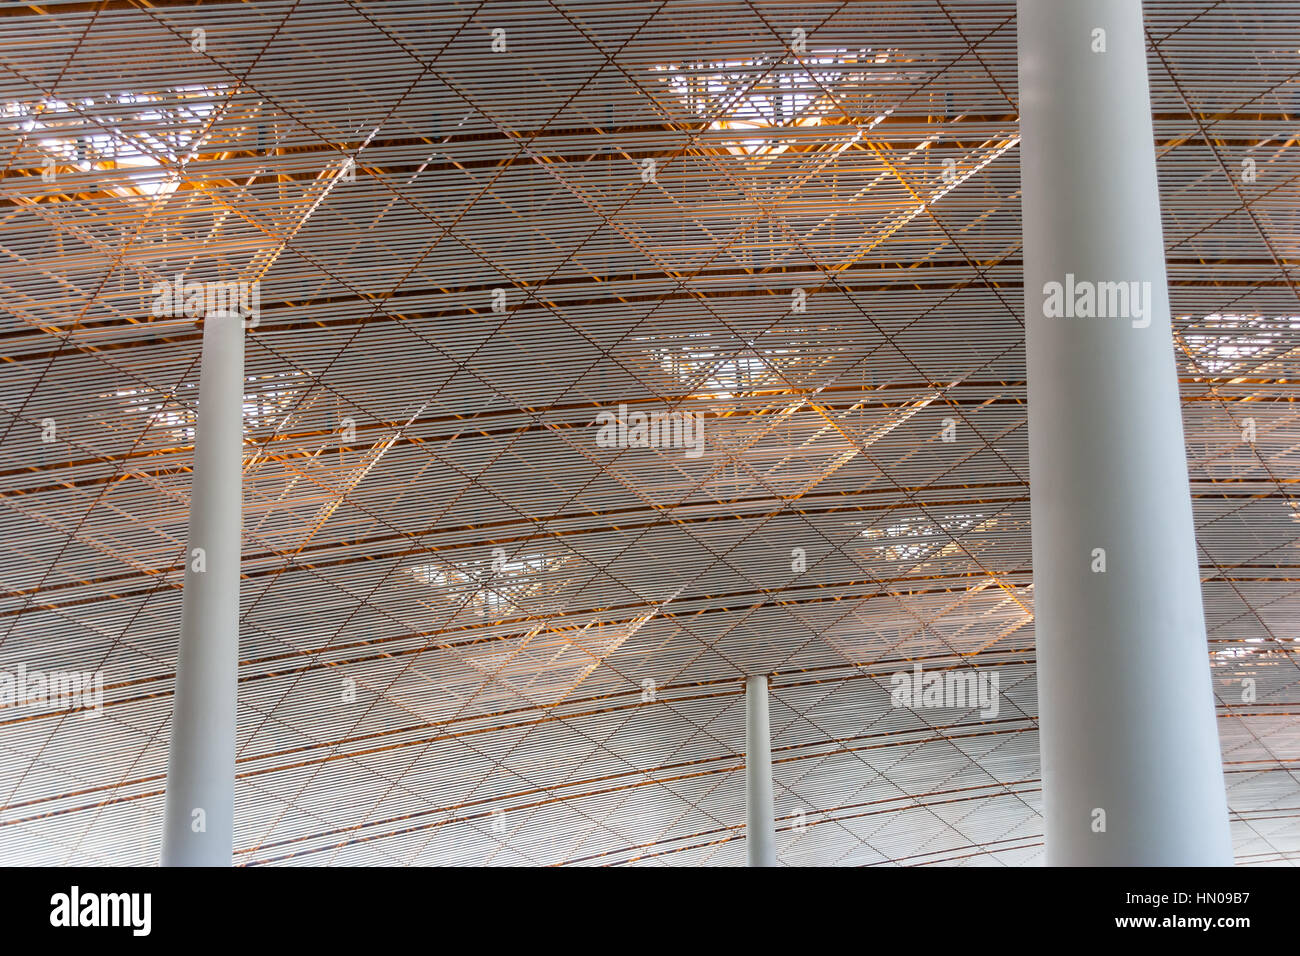 Ceiling of the new international airport in Beijing, China Stock Photo